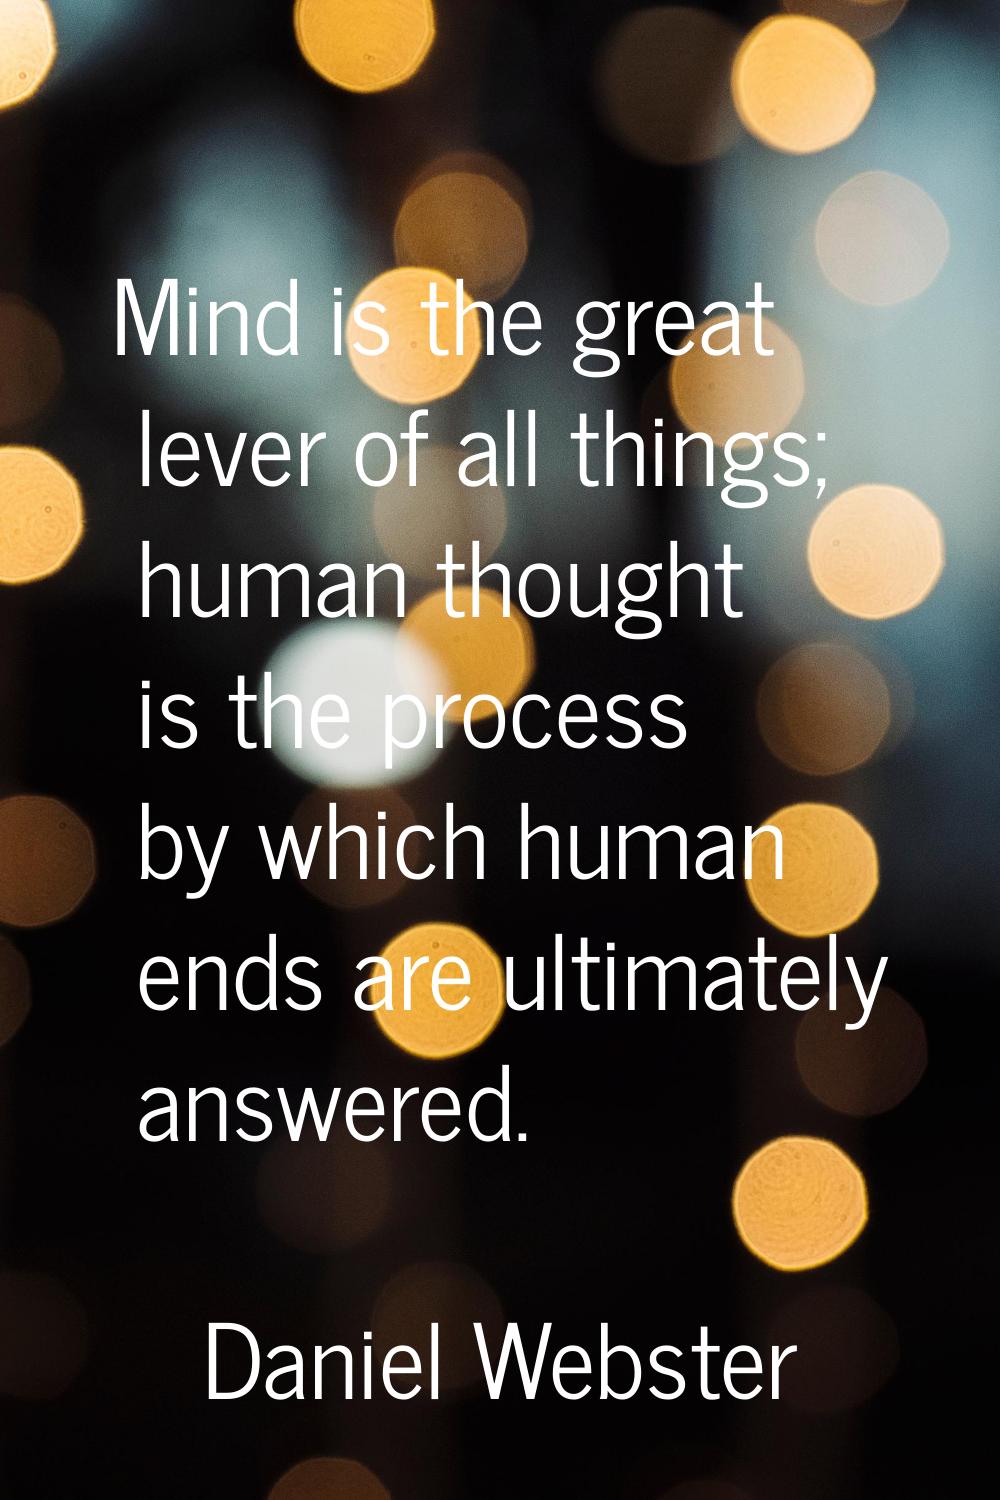 Mind is the great lever of all things; human thought is the process by which human ends are ultimat